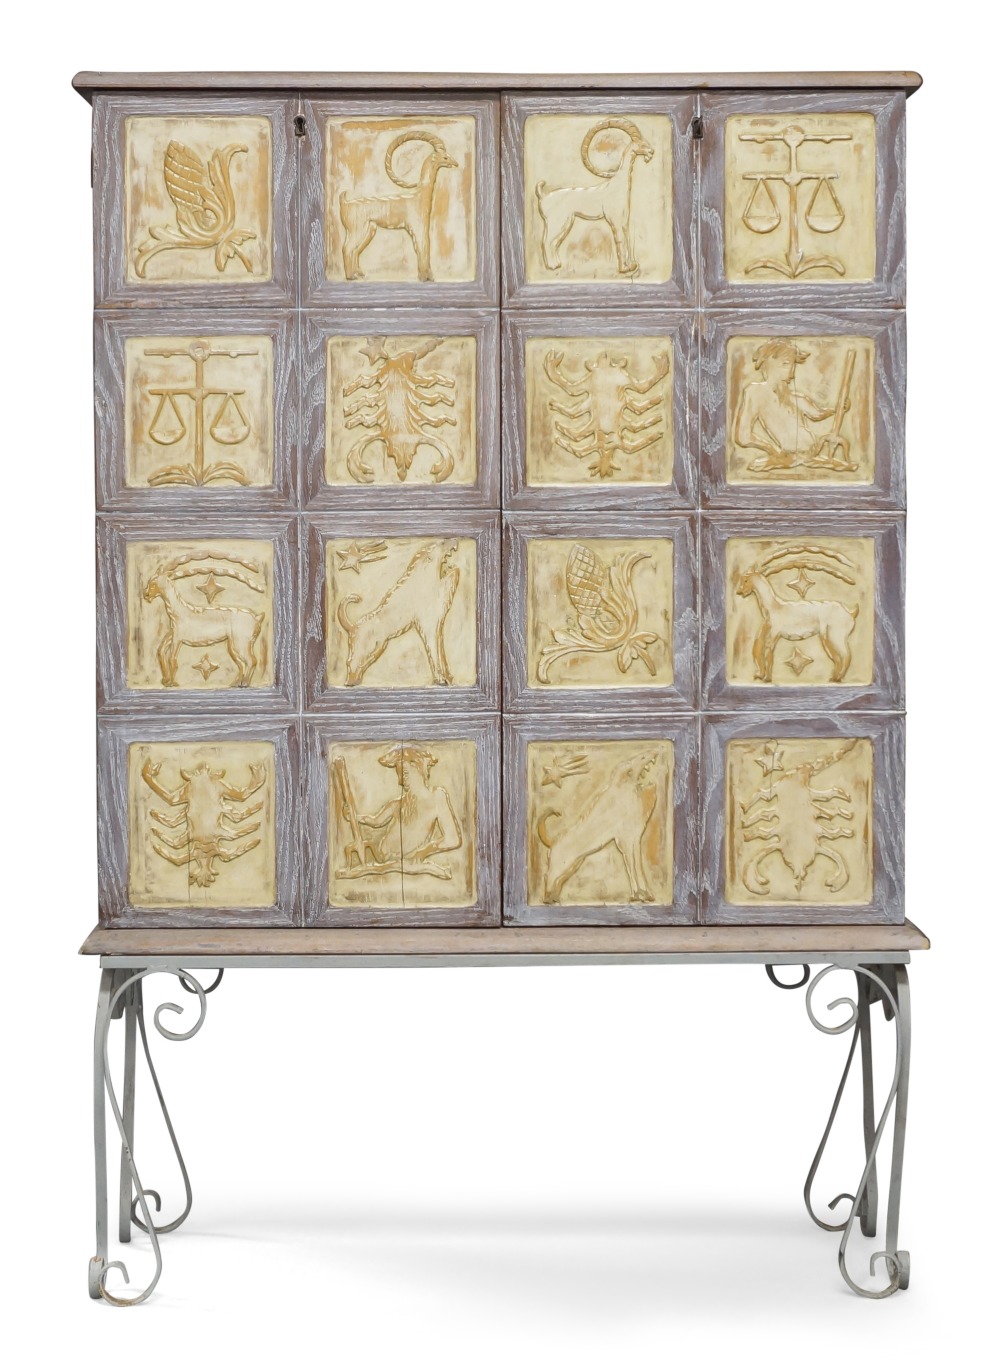 Designer Unknown, French Art Deco Zodiac cabinet on later wrought iron stand, circa 1940, Painted